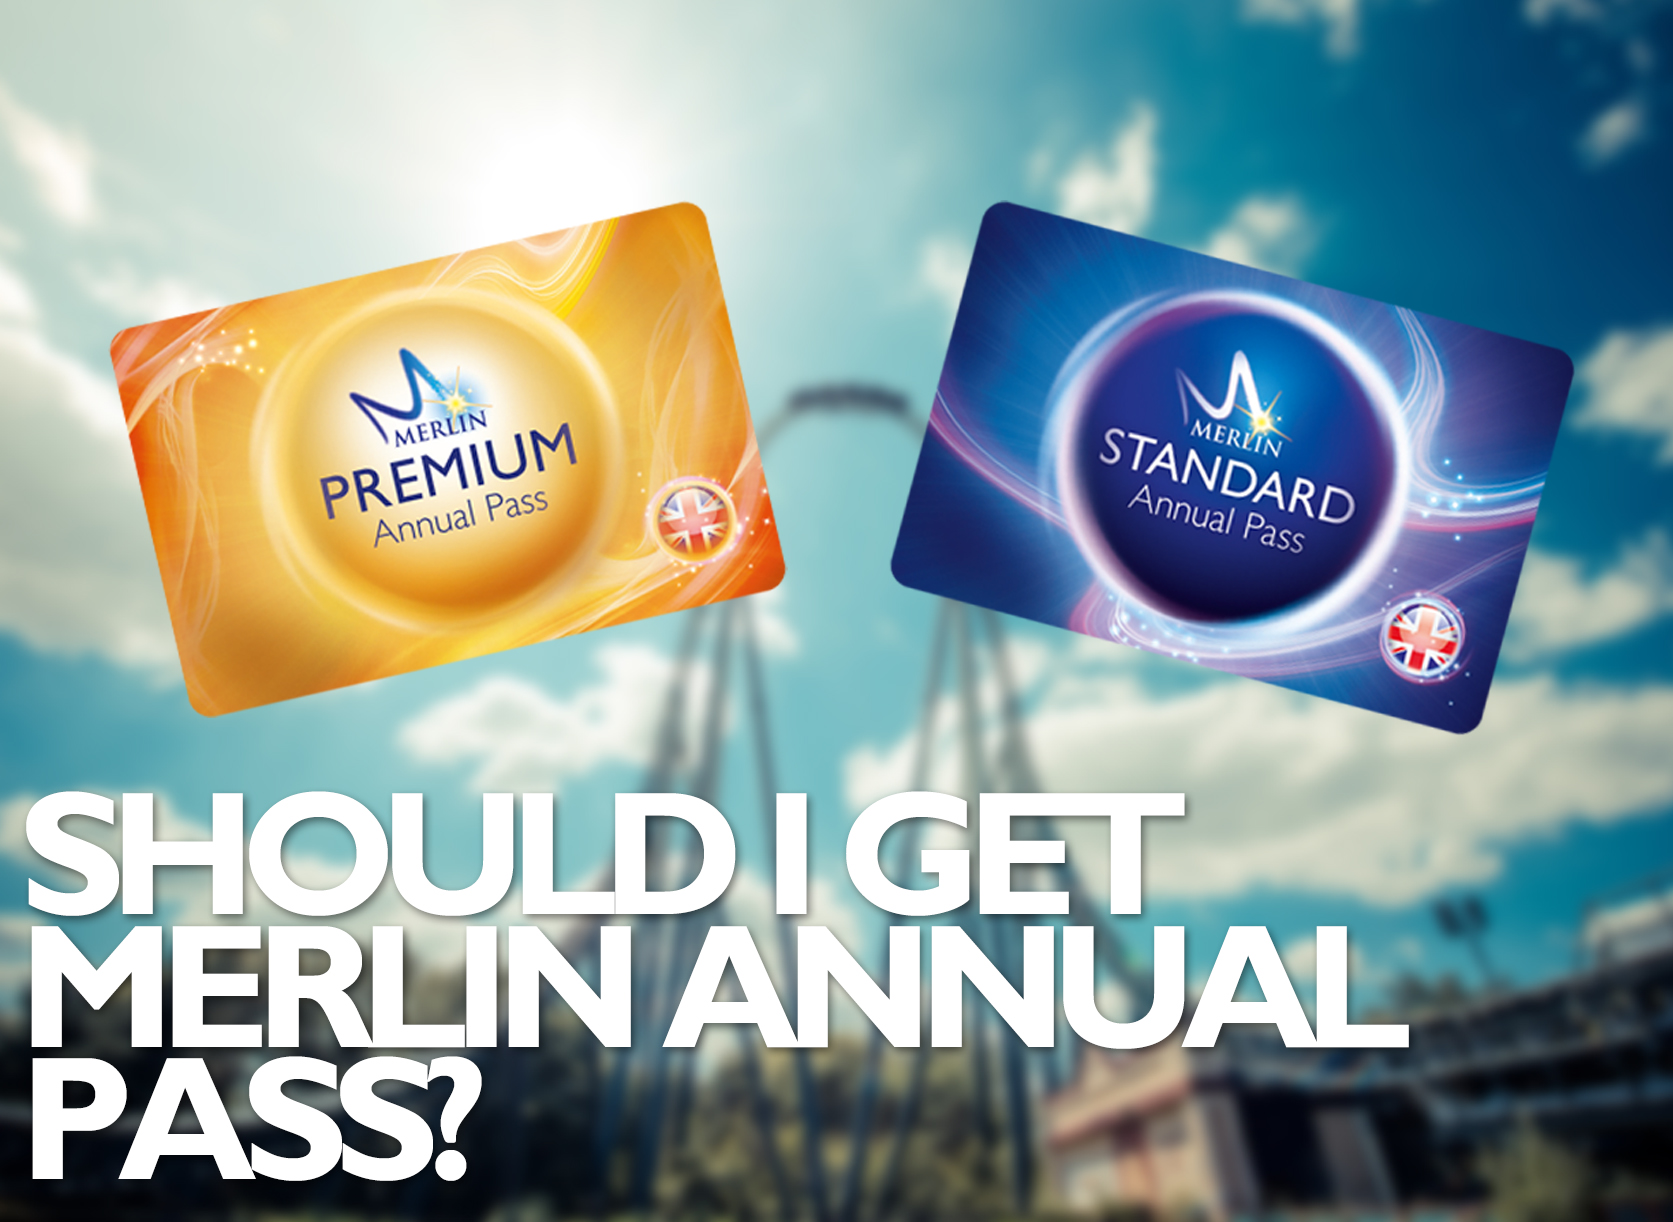 Should I get a Merlin Annual Pass?